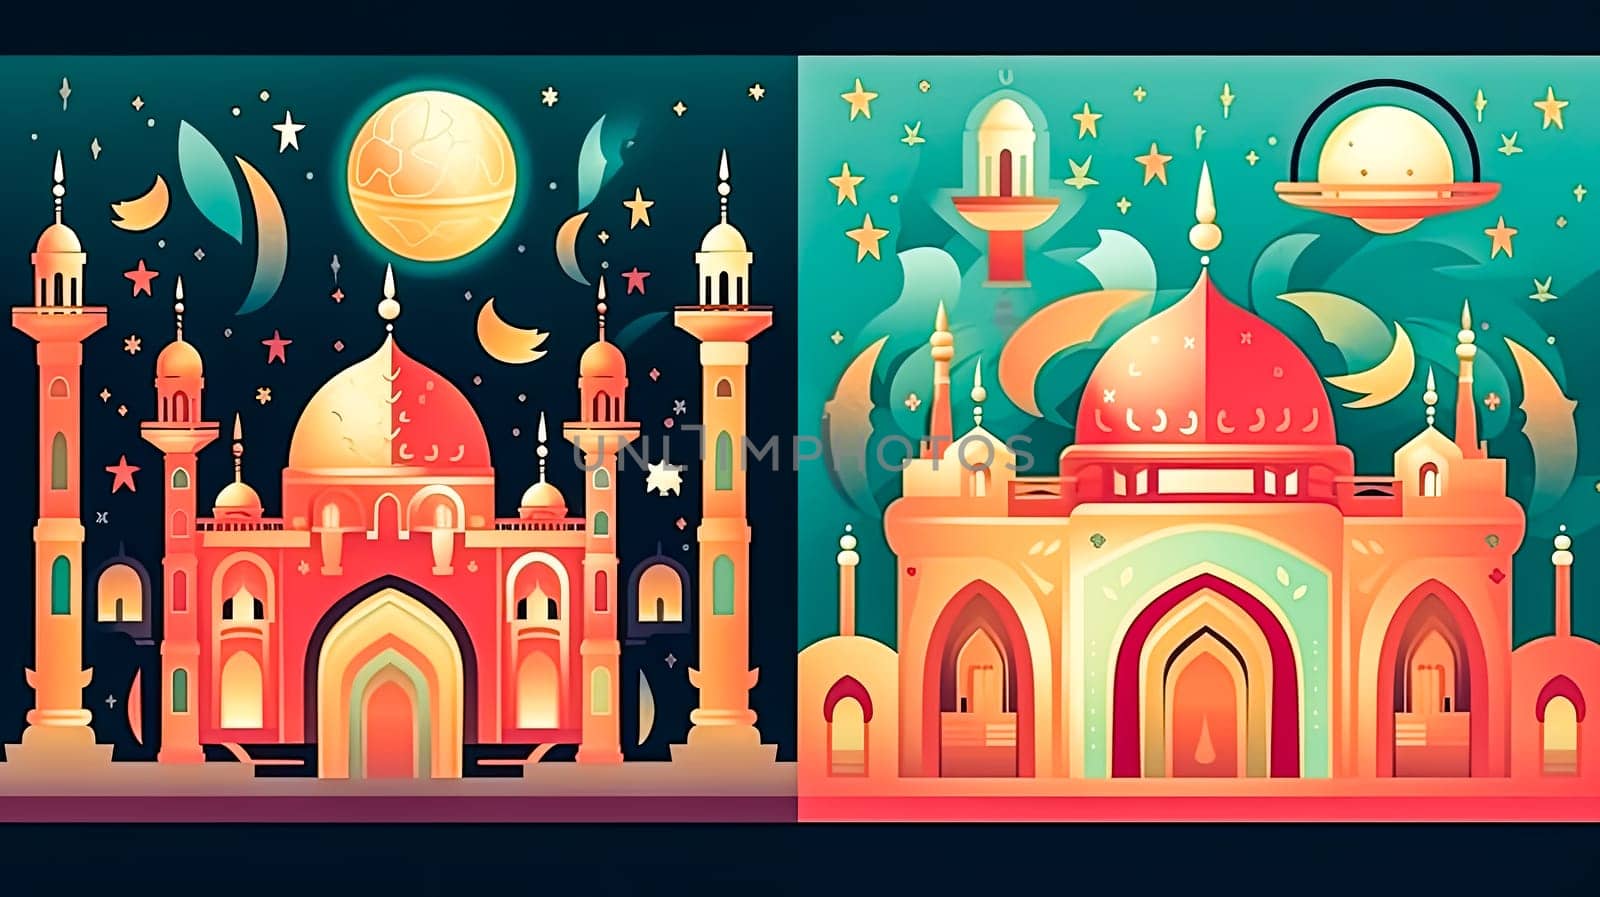 Night of blessings, A mosque adorned with lights, a radiant symbol of Ramadan Mubarak an enchanting scene capturing the essence of the holy month